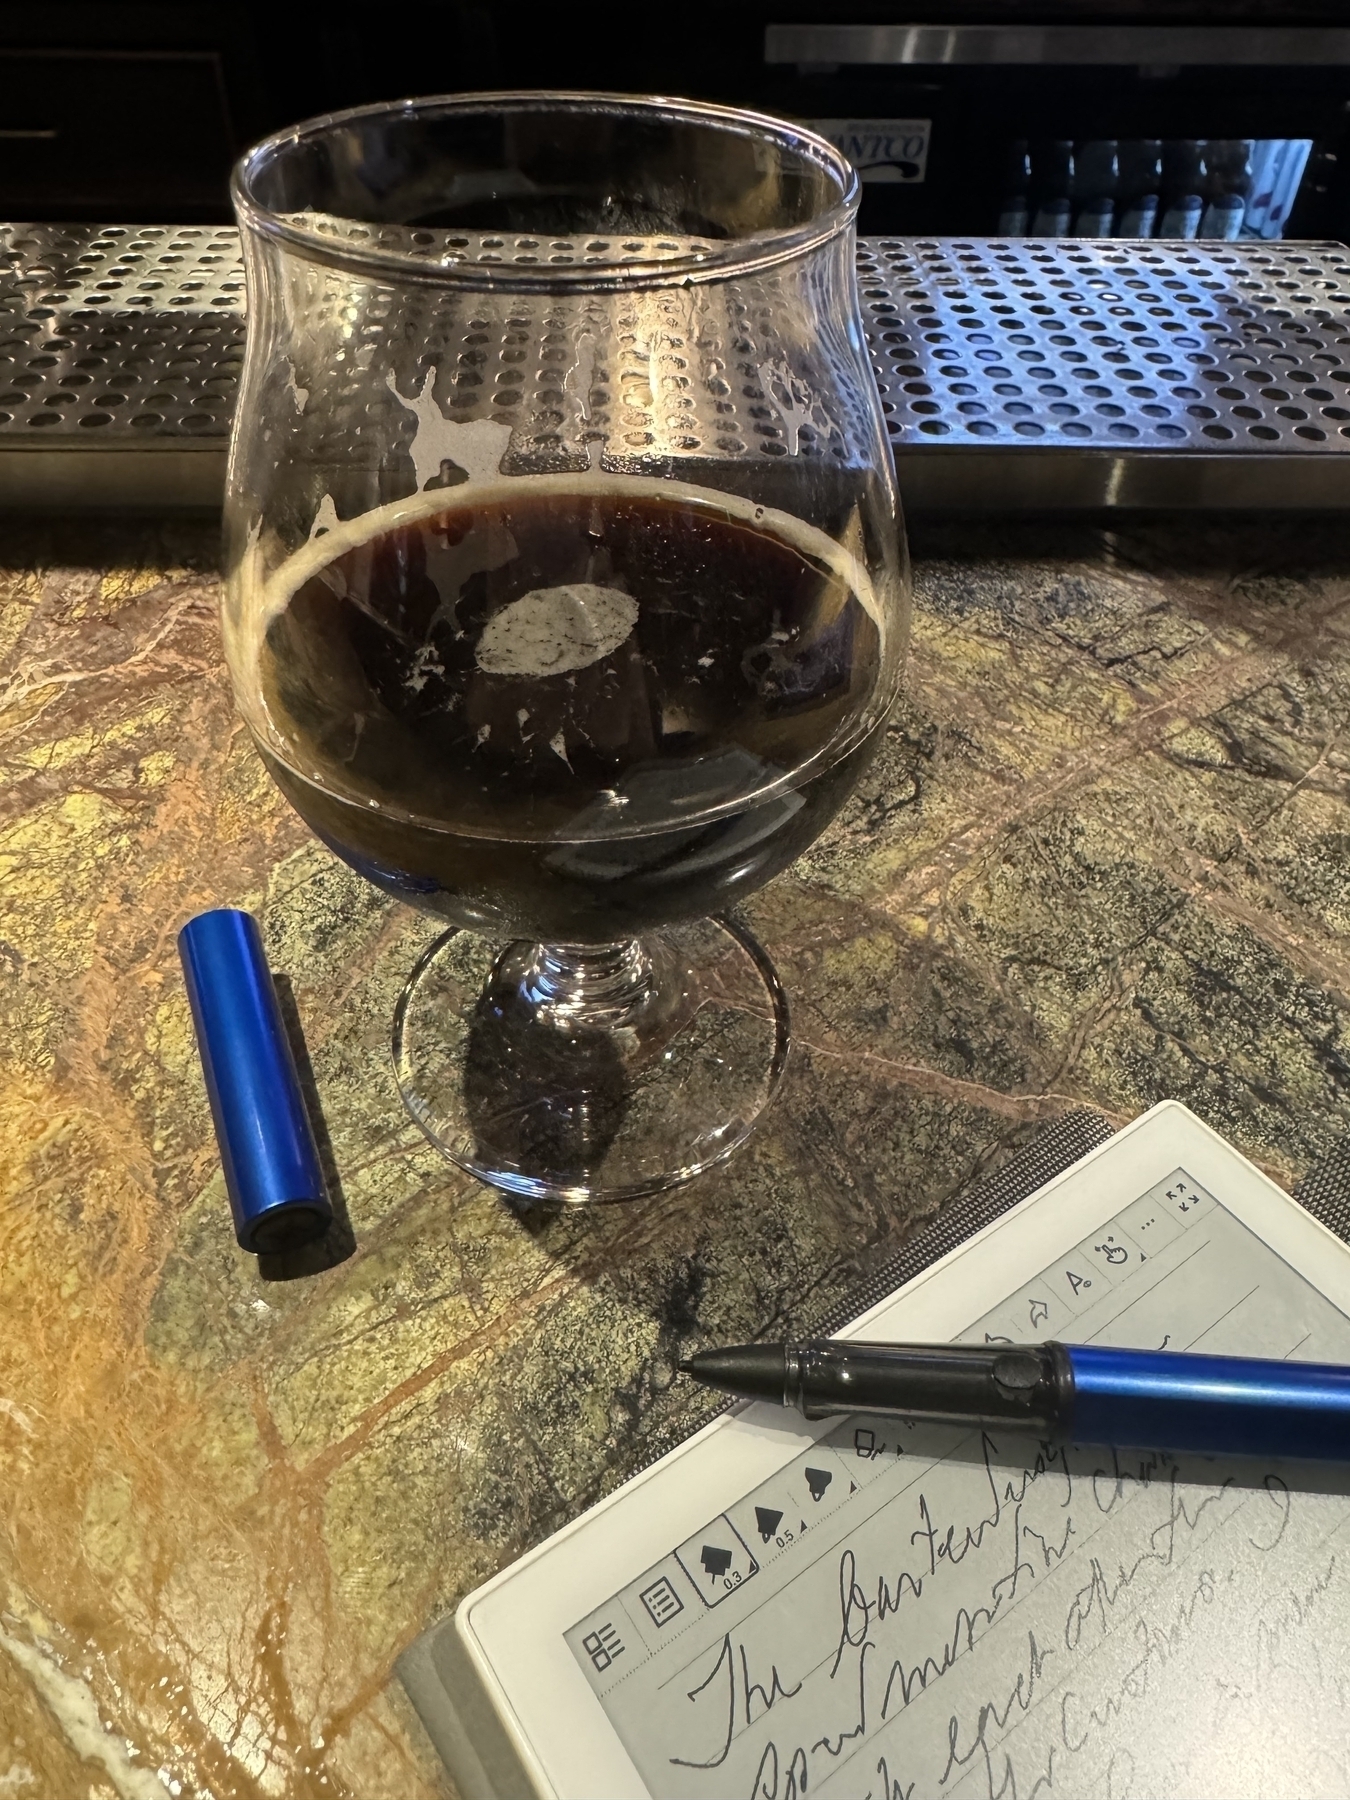 Beer and writing implements. 